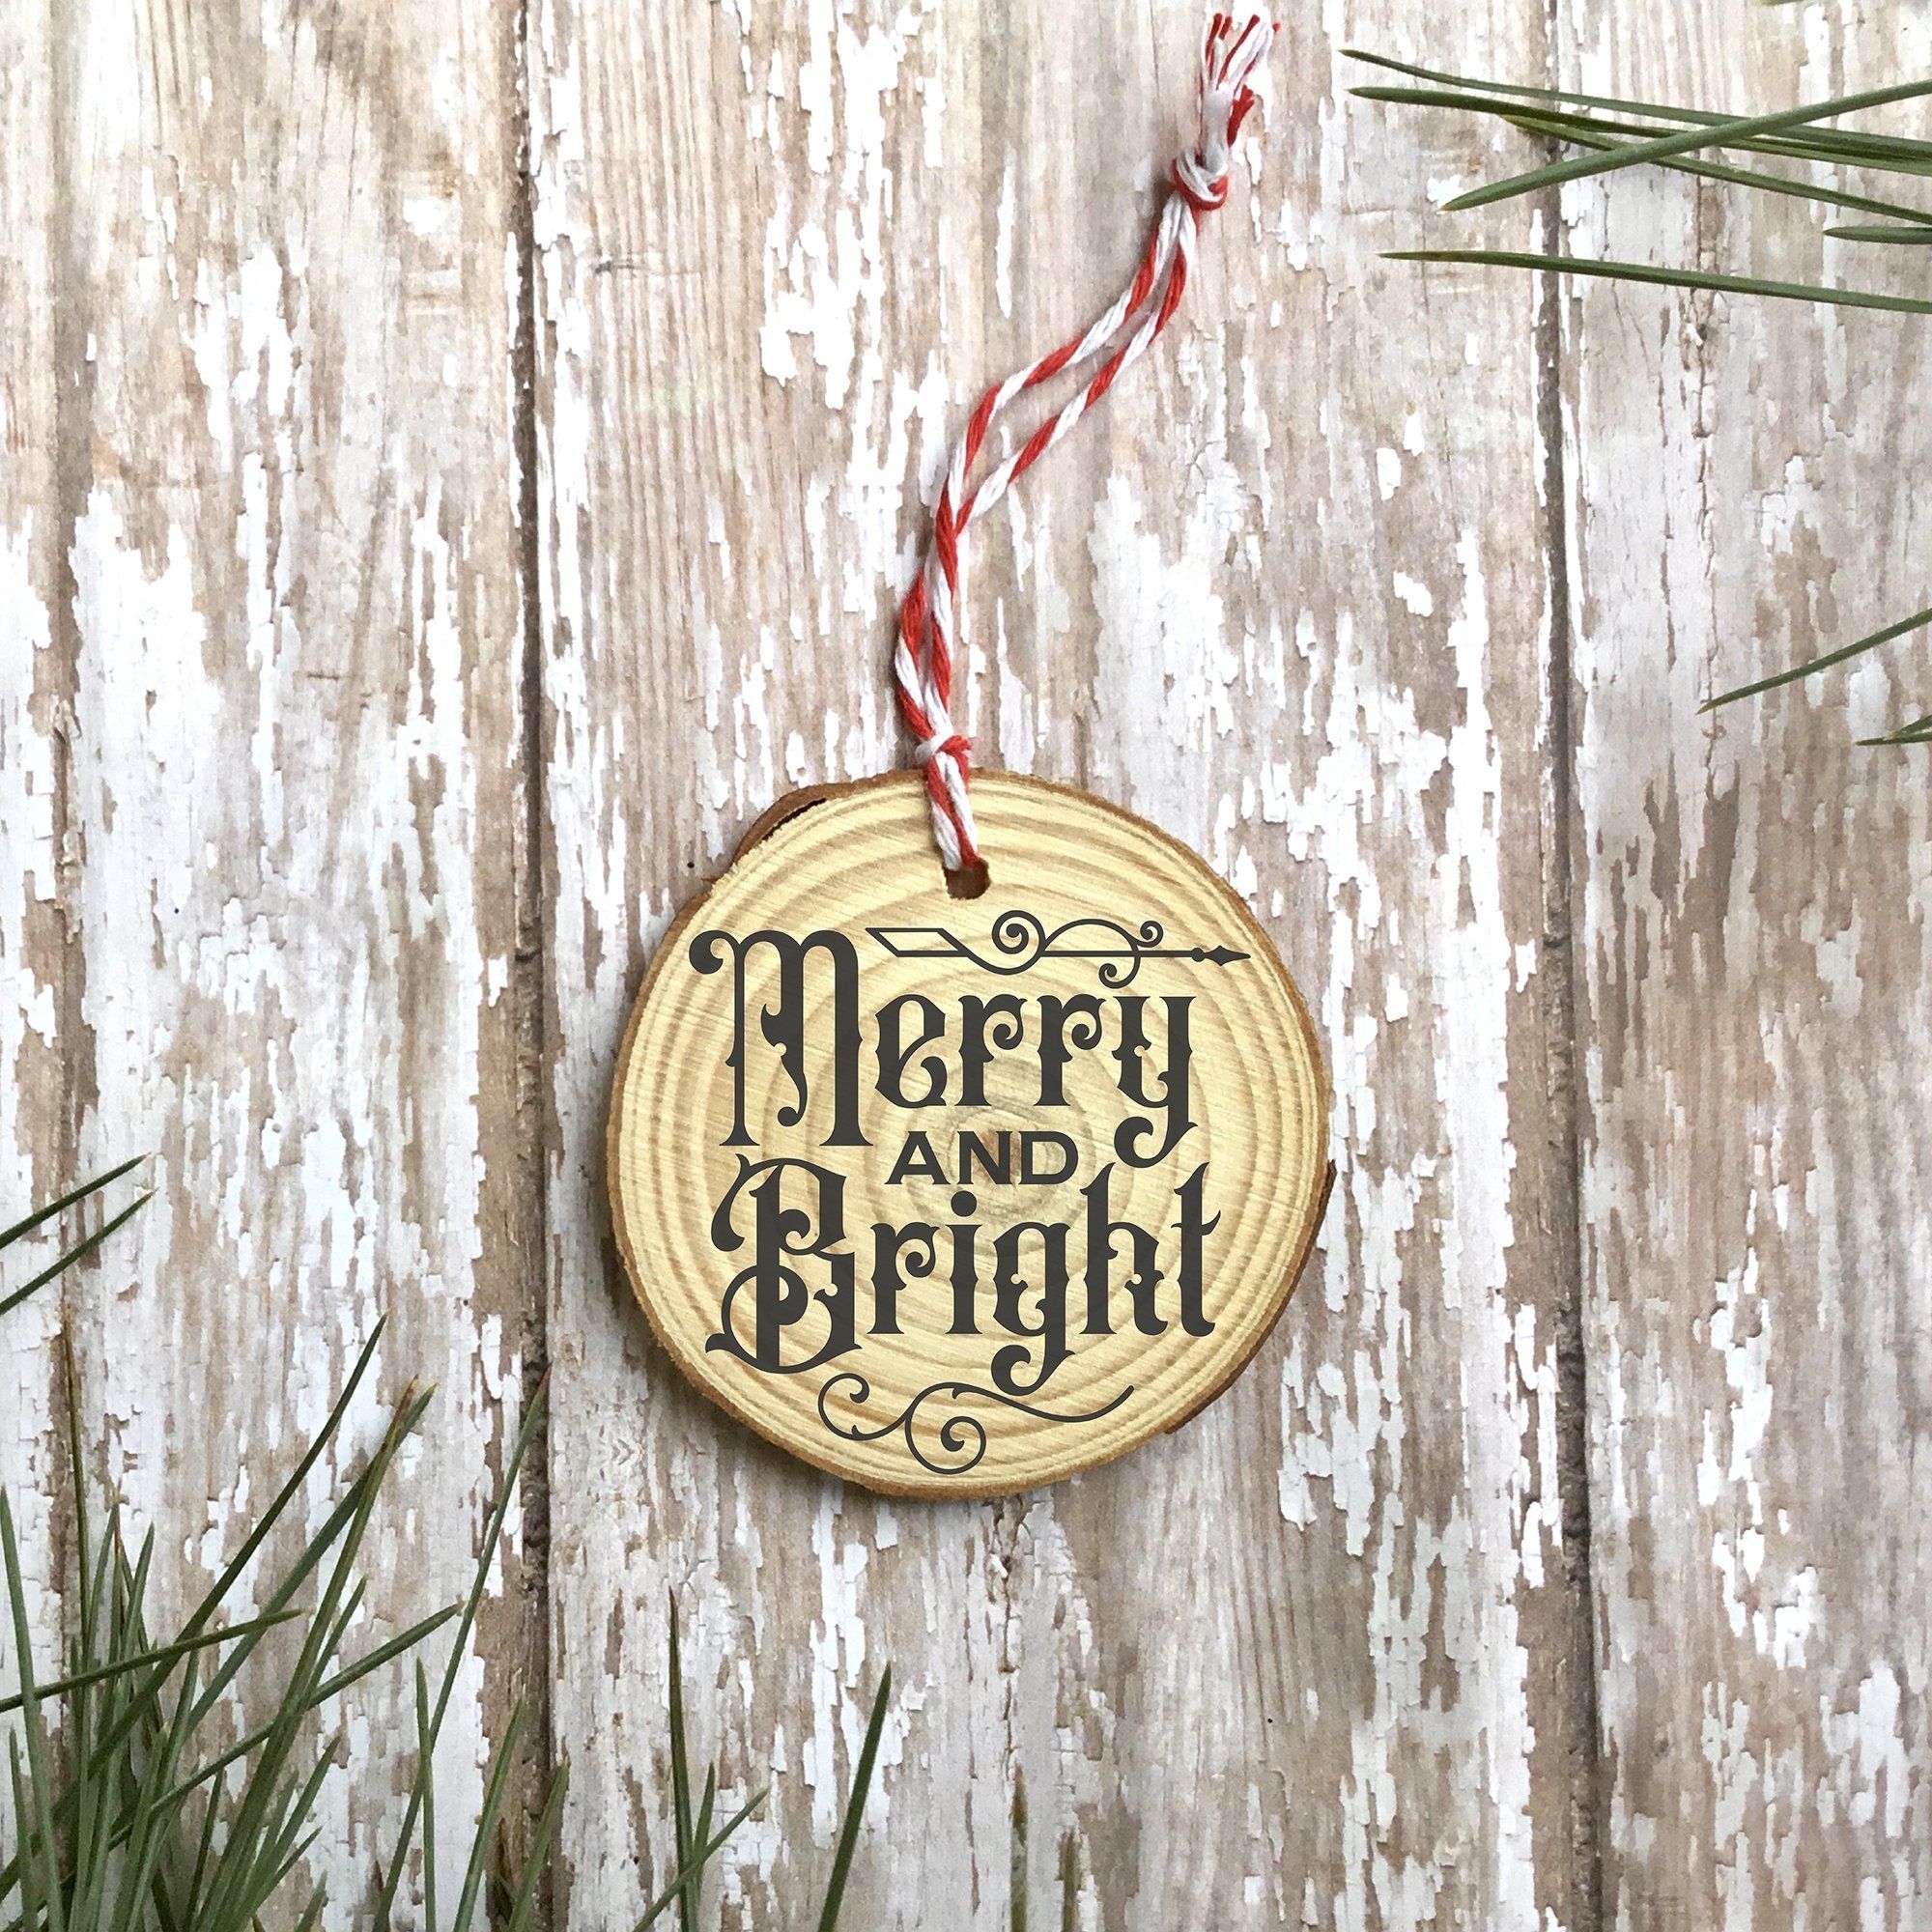 Gothic Christmas Ornament SVG File - Merry and Bright - Commercial Use SVG Files for Cricut & Silhouette